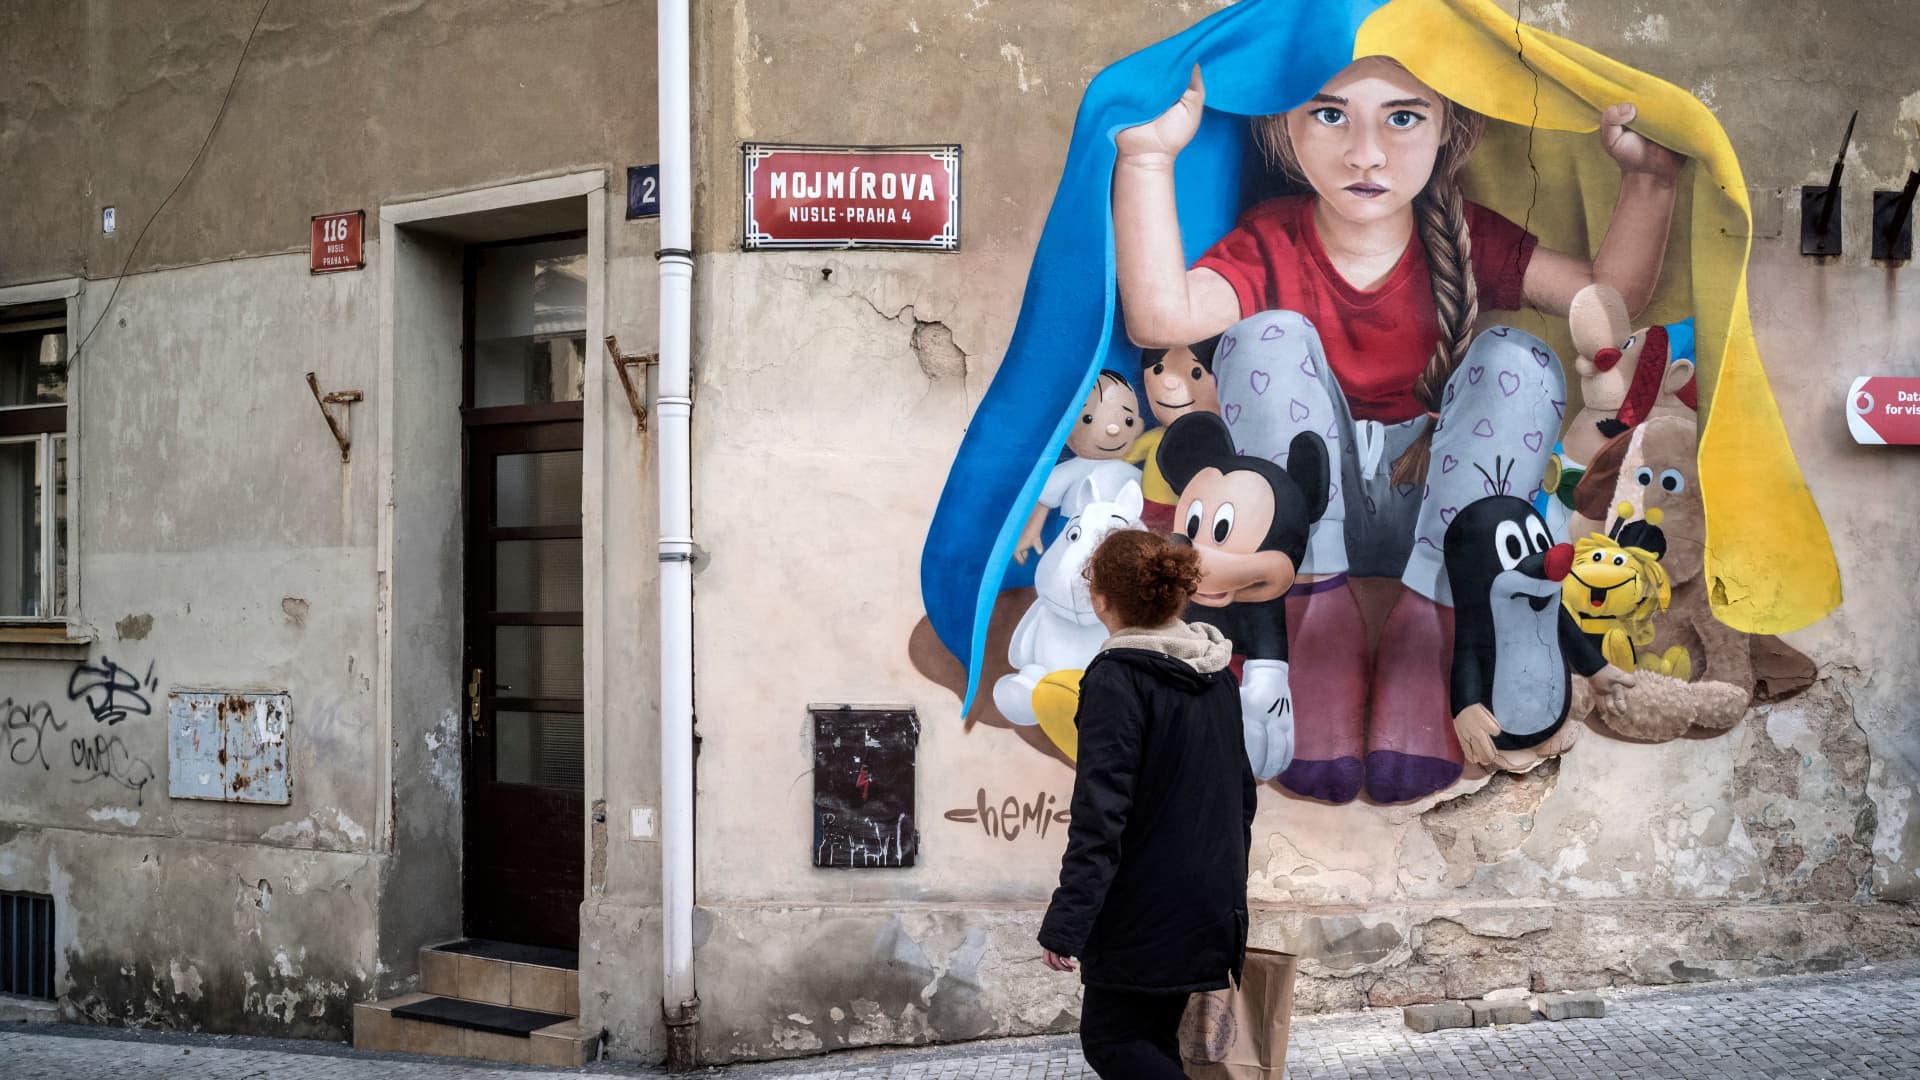 A woman walks past a graffiti mural, showing a child protecting with a Ukrainian flag against the war, made by artist ChemiS, on March 19, 2022 in Prague.